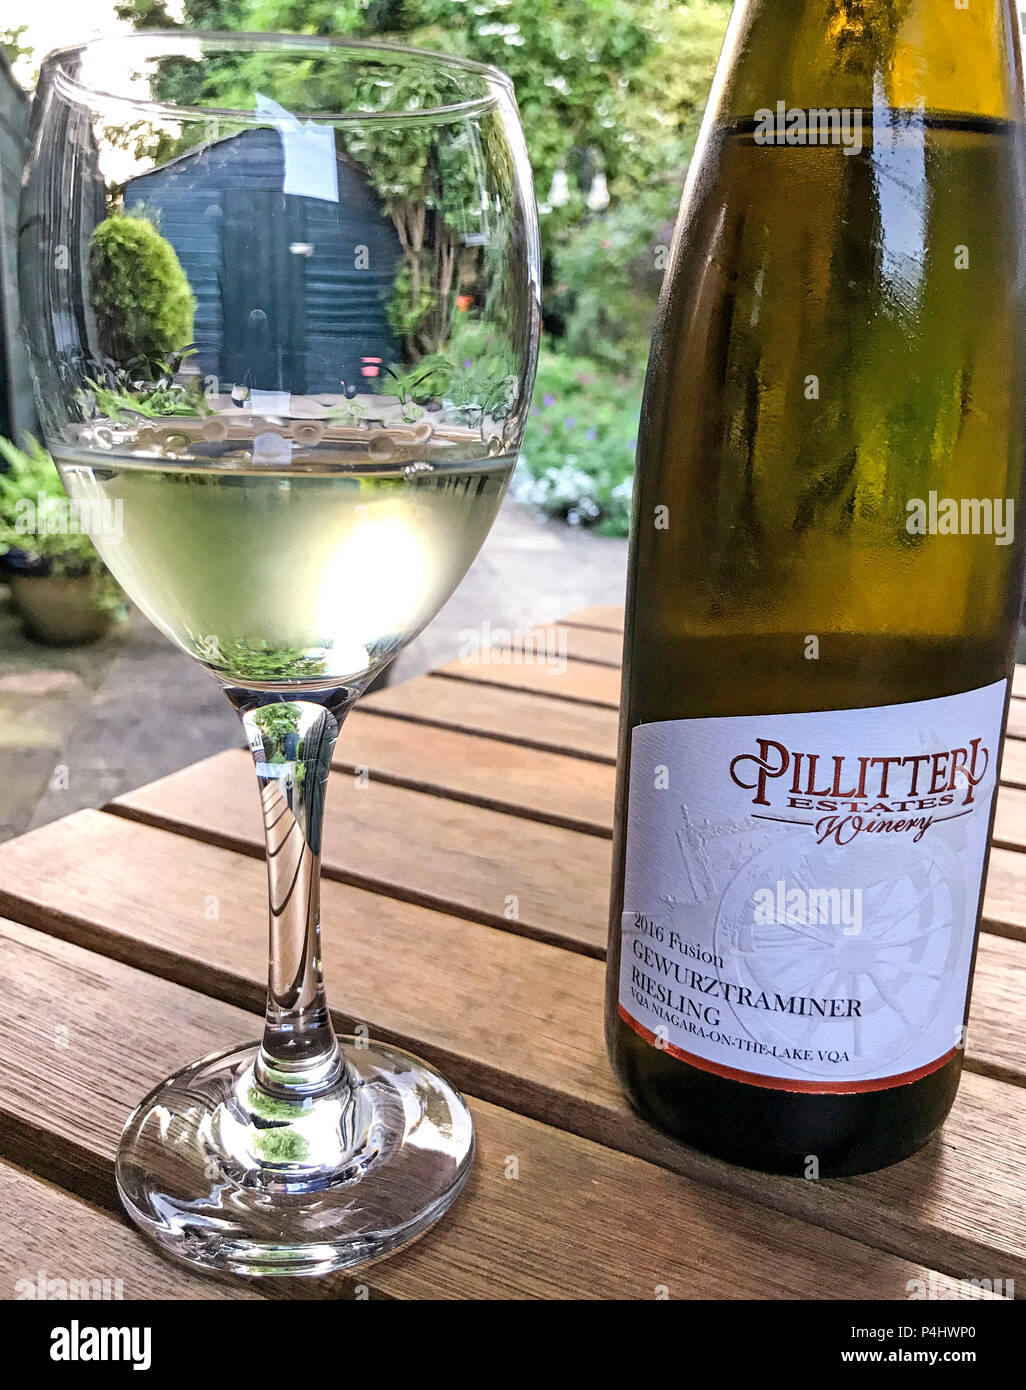 Canadian Pillitteri Estates Winery 2016, Fusion Gewurztraminer Riesling vqa niagara-on-the-Lake vin blanc, bouteille et verre Banque D'Images